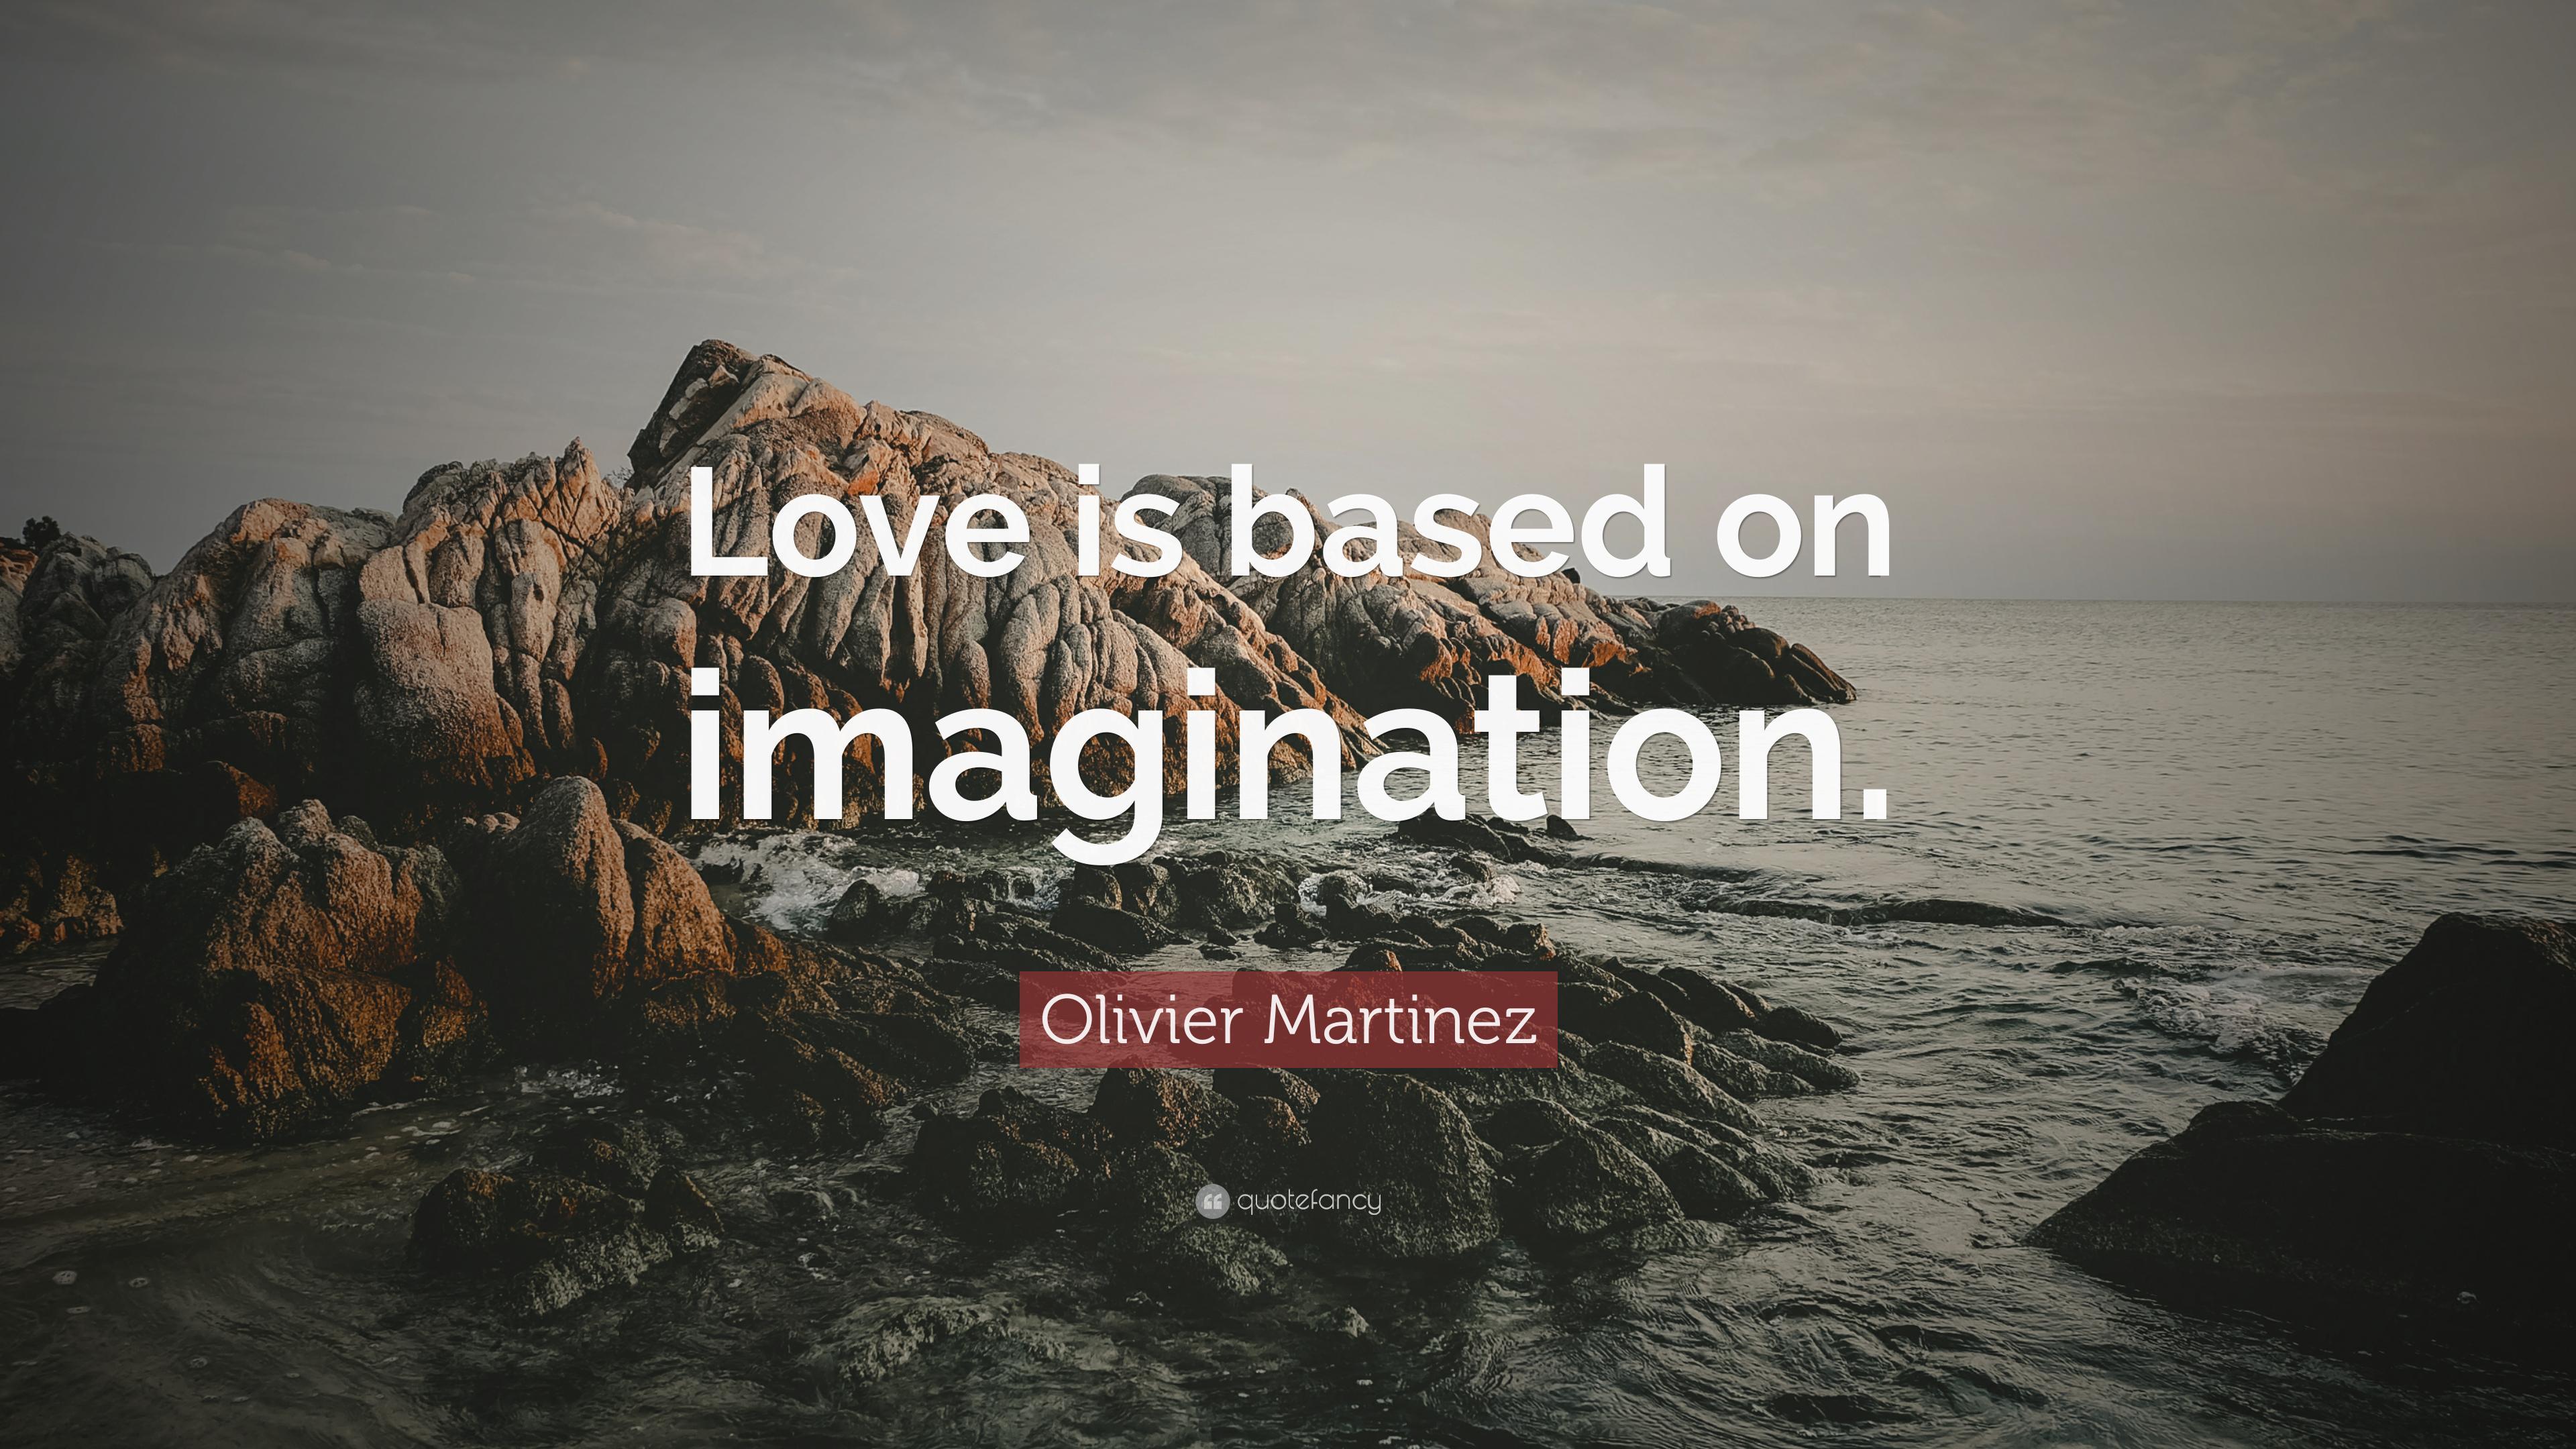 Olivier Martinez Quote: “Love is based on imagination.” 7